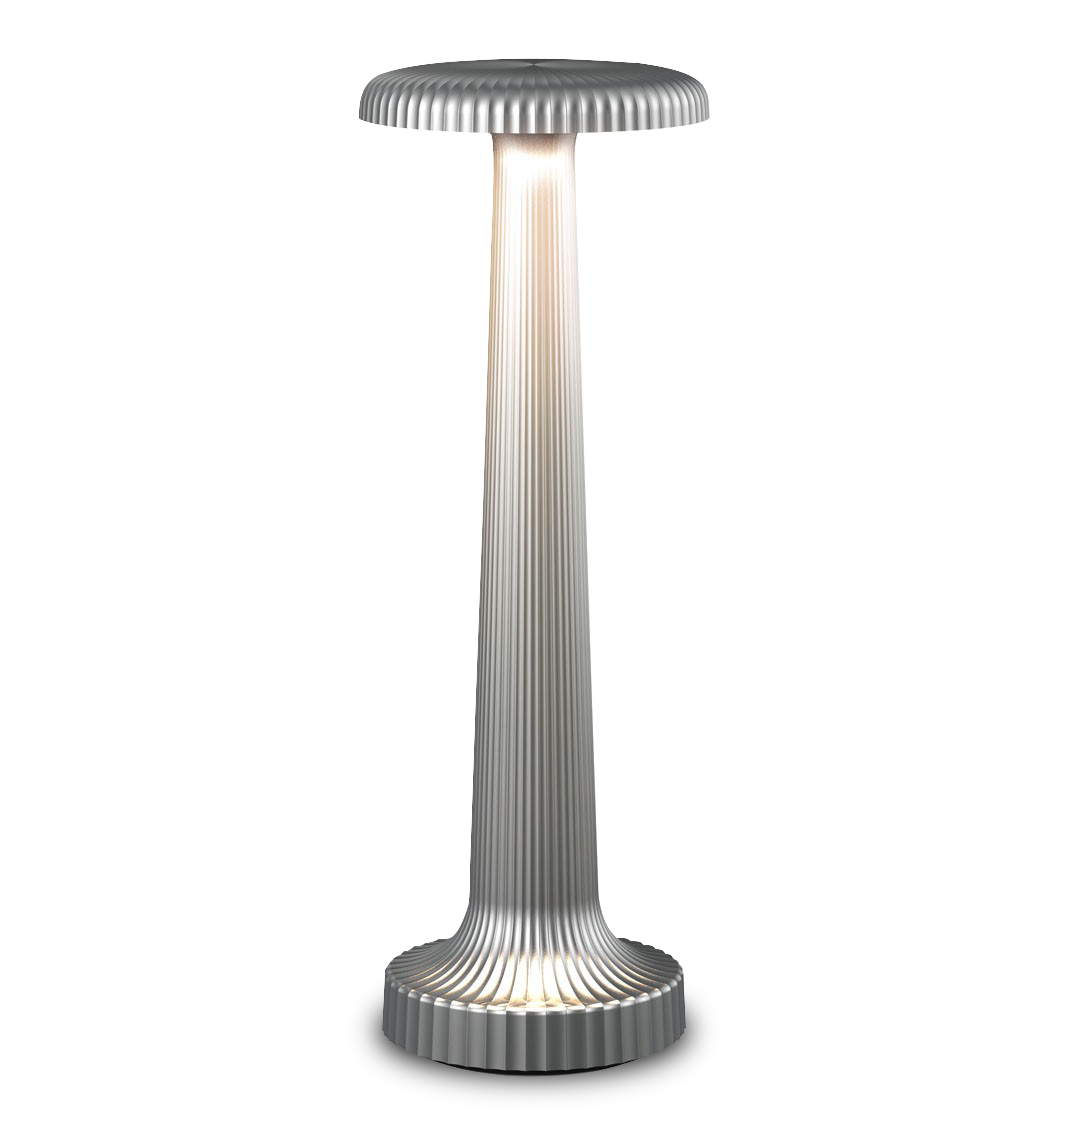 Tall Poppy Cordless Table Lamp by Neoz